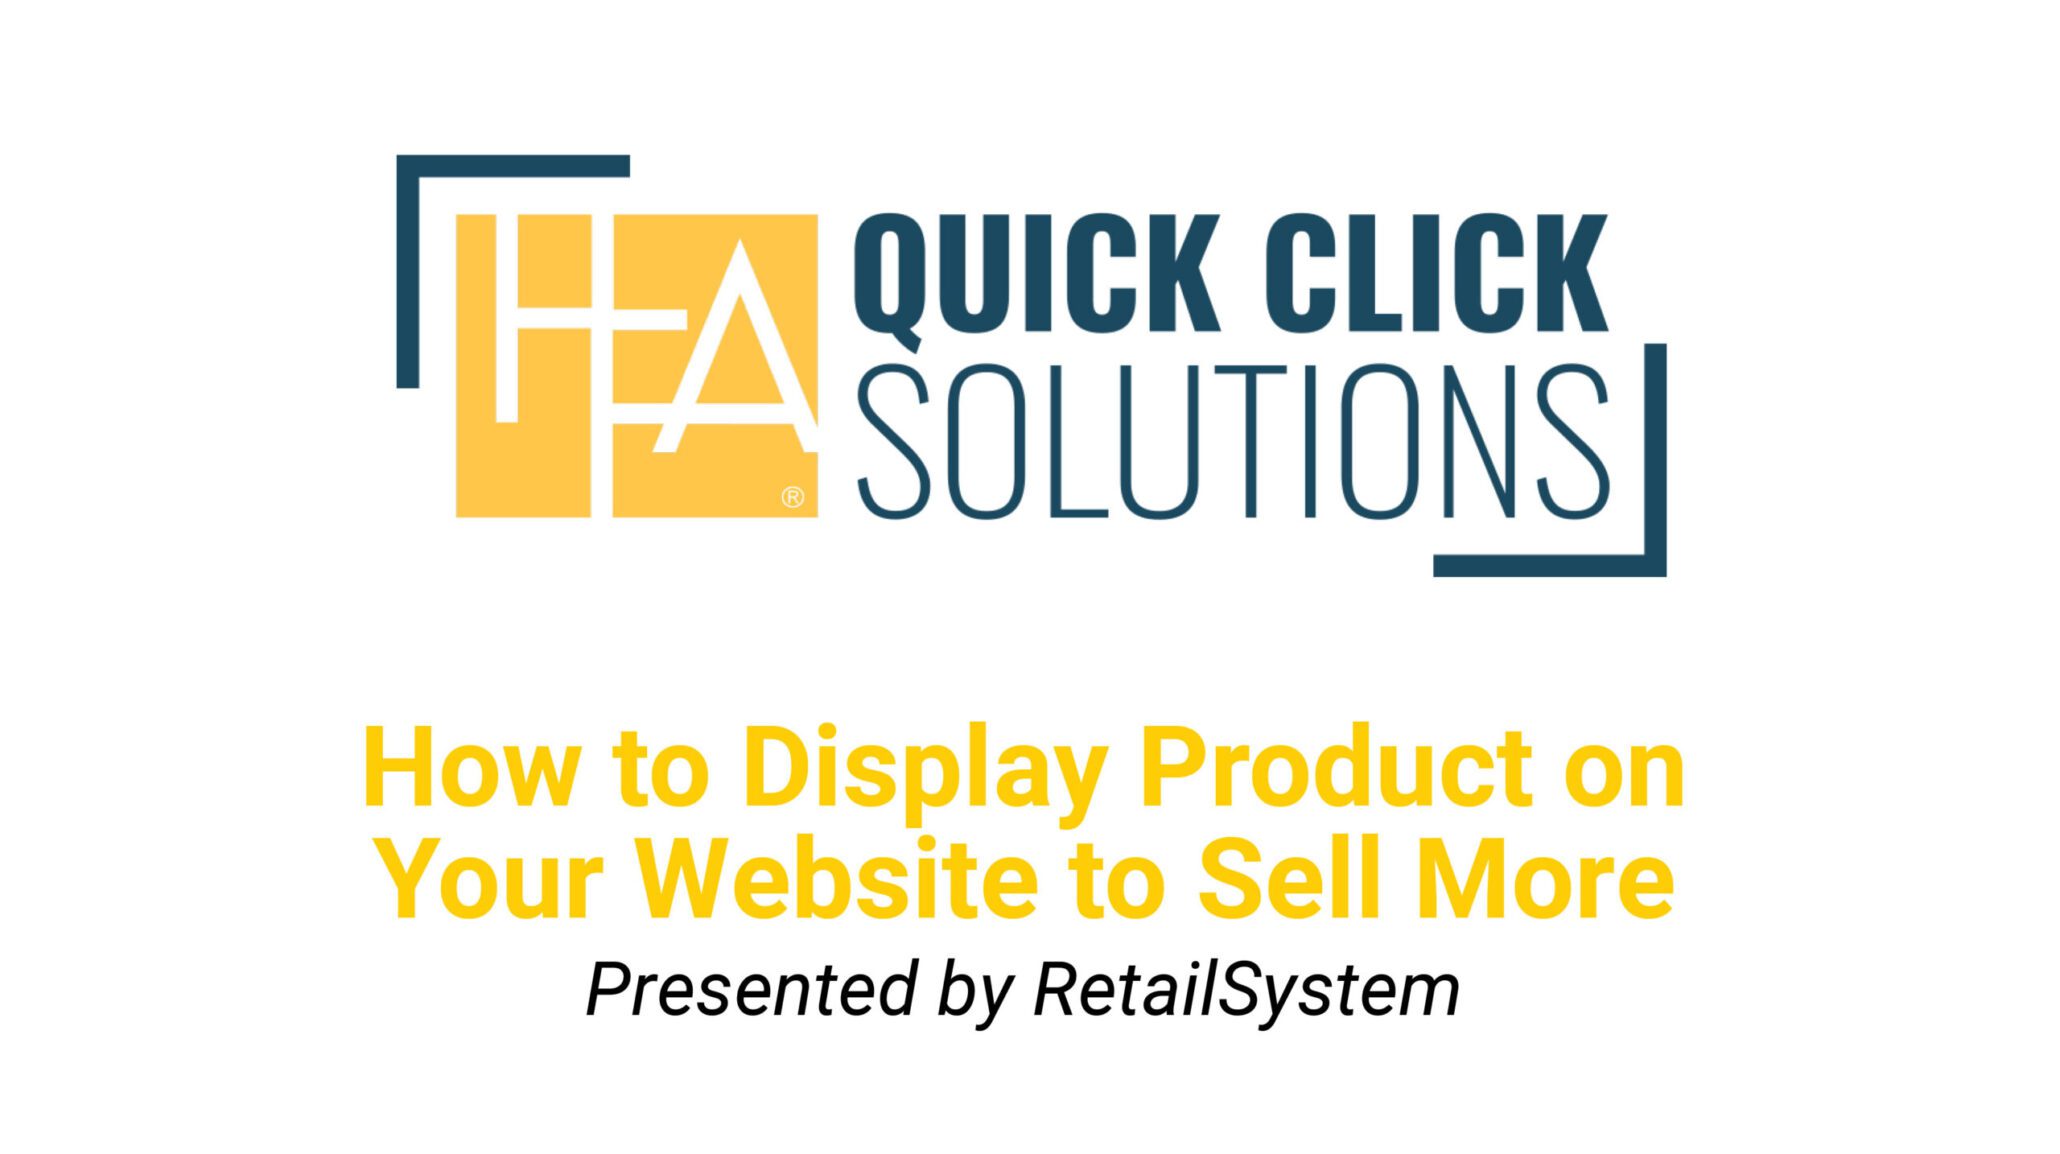 Quick Click Solutions: How to Display Product on Your Website to Sell More